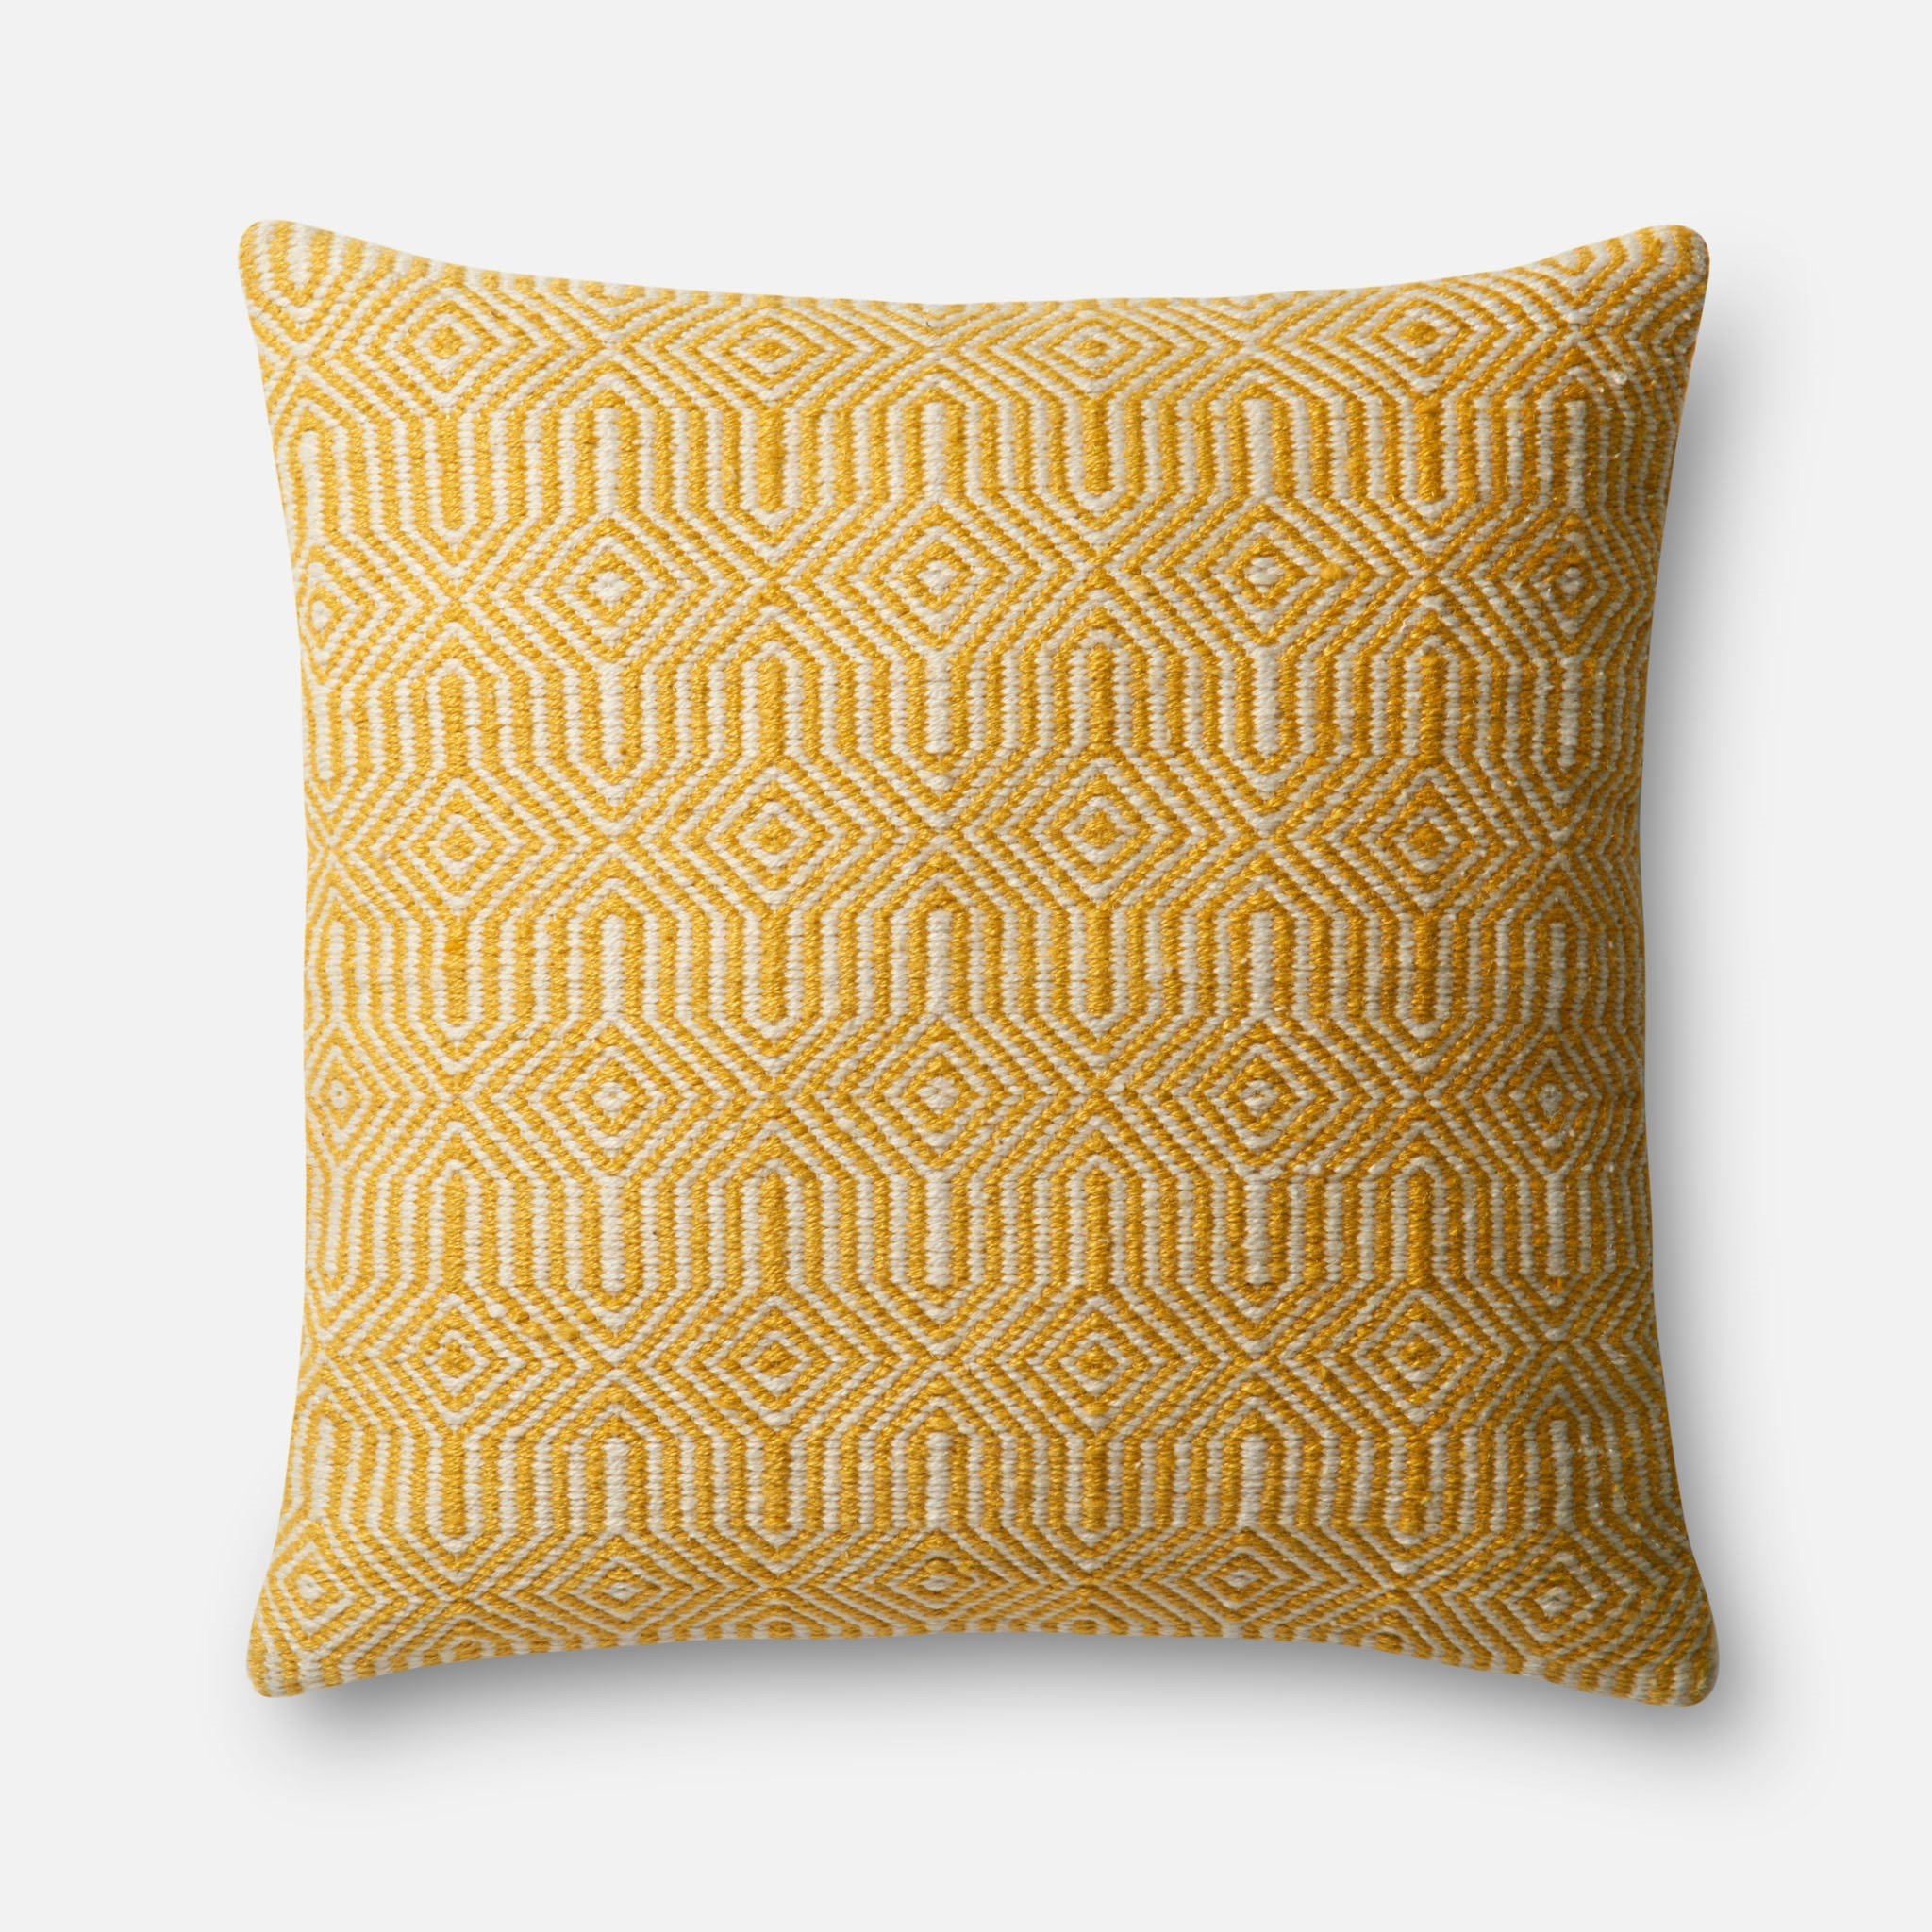 Indoor/Outdoor Throw Pillow with Down Fill, Yellow & Ivory, 22" x 22" - Image 0